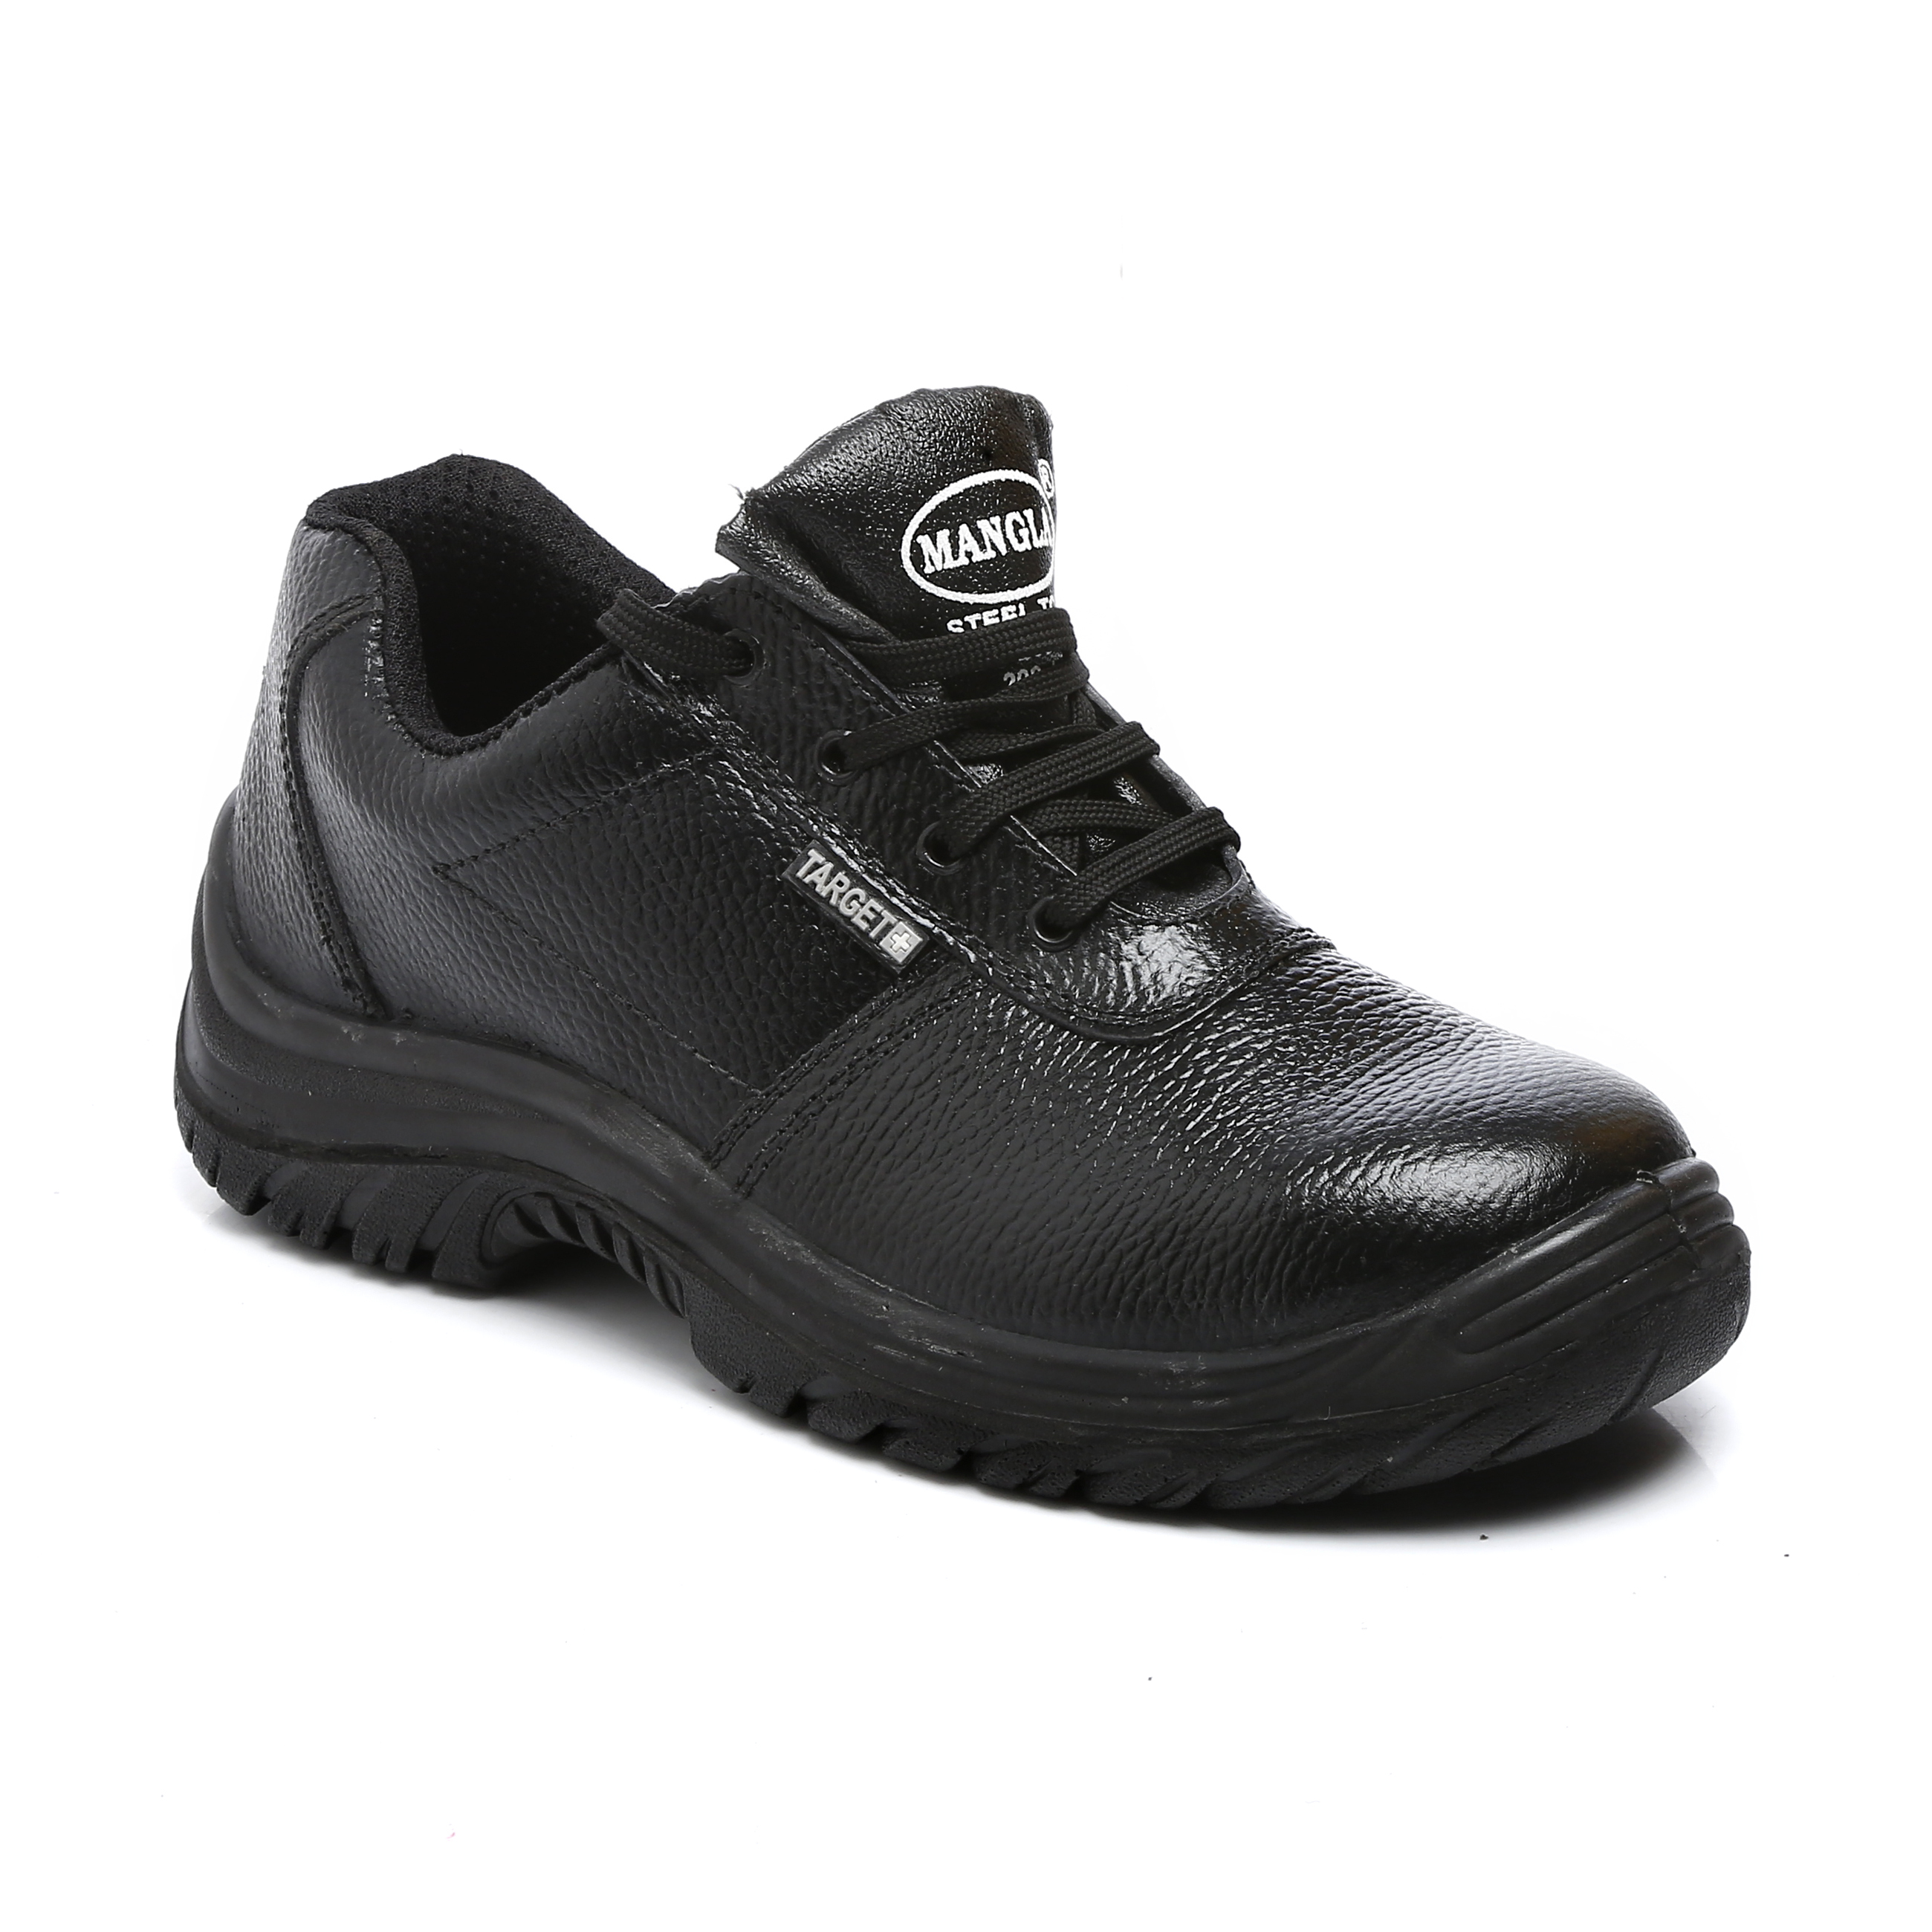 Export Quantity Safety Shoes